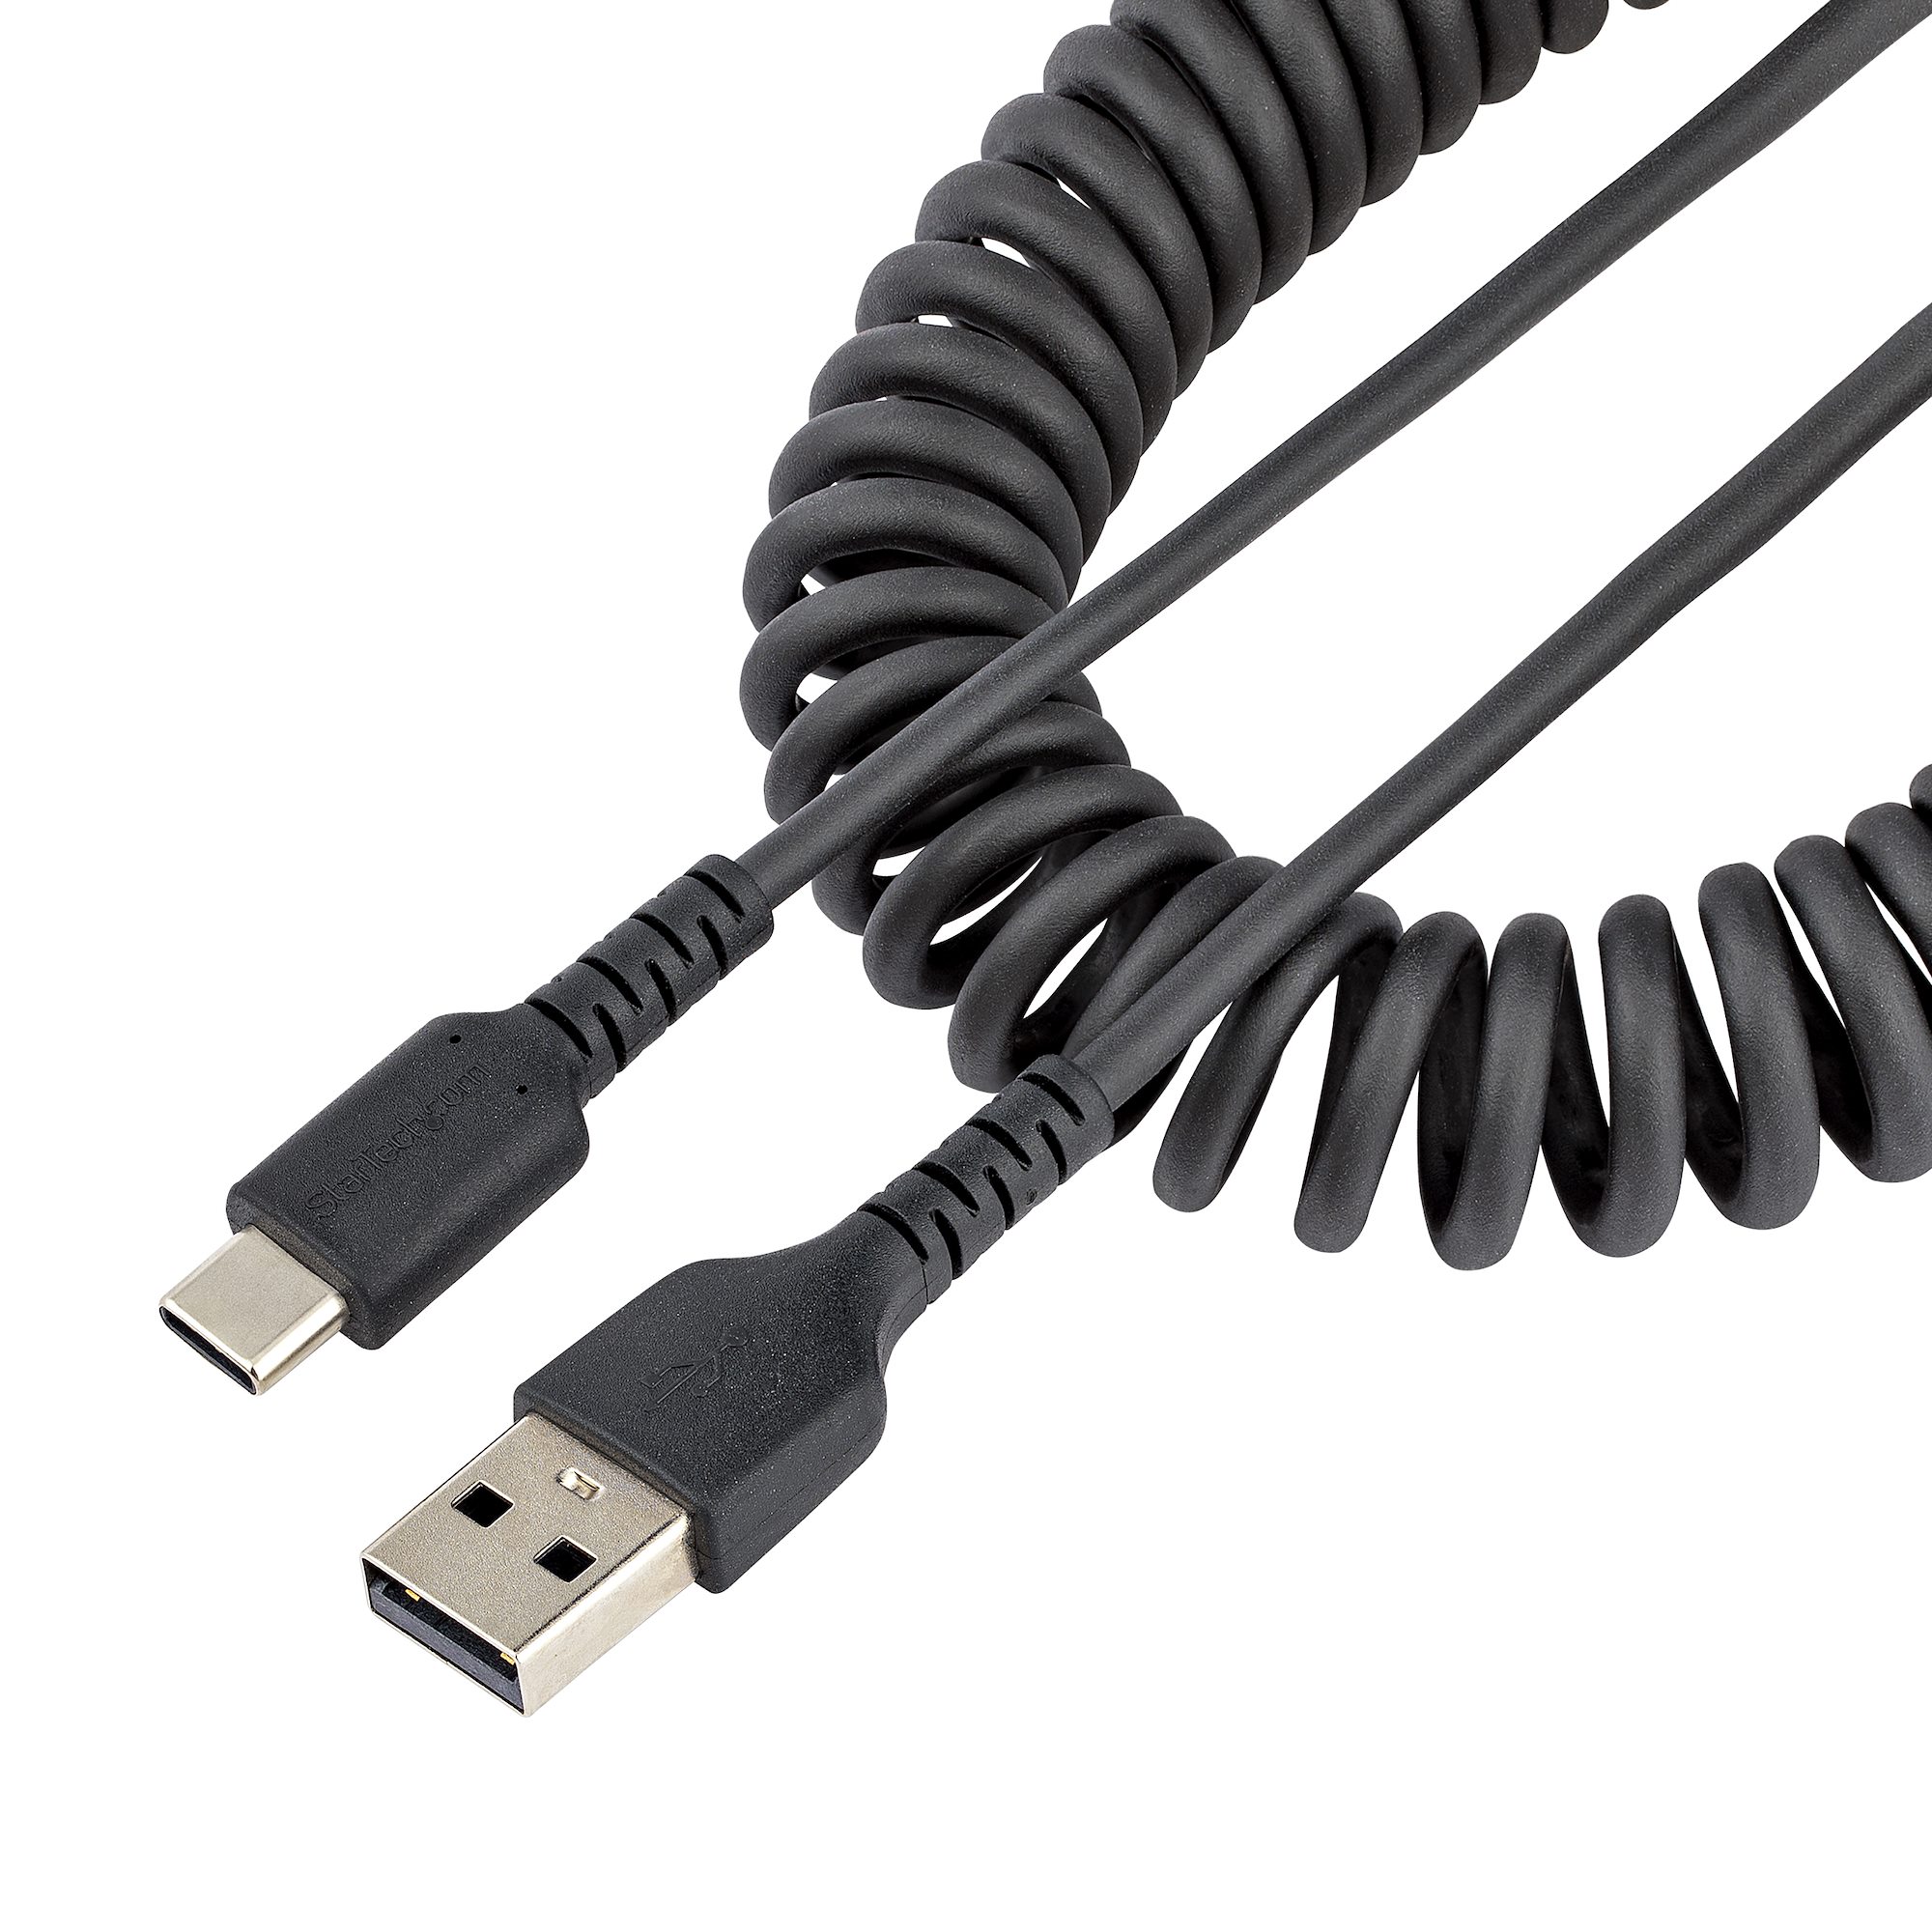 High Quality USB Type-C USB-C Male to USB 3.0 Type-A Male Cable,USBC to USB  3.0 Cord for Macbook PC NoteBook 3ft 1m